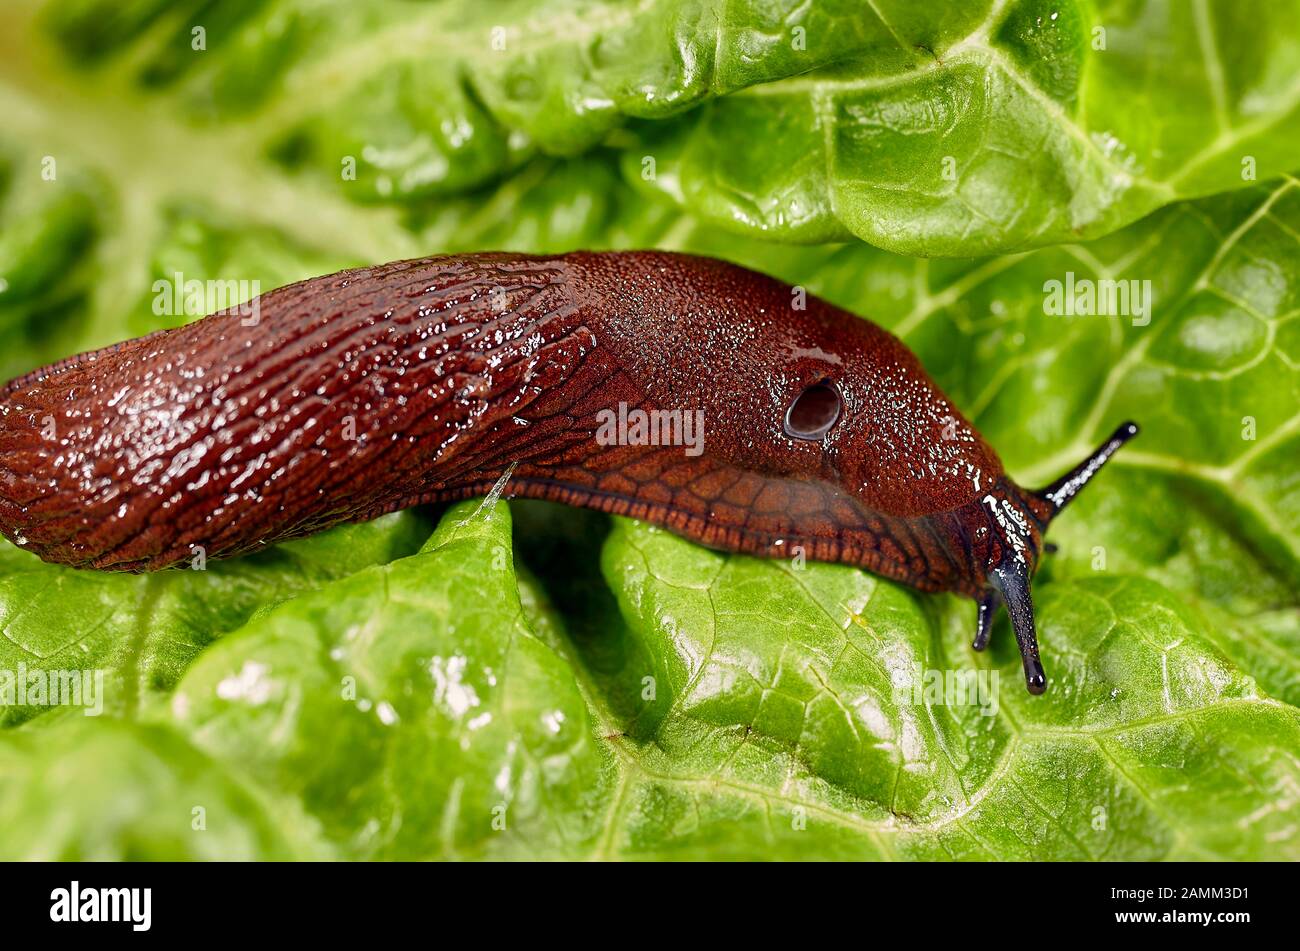 The Spanish slug (Arion vulgaris, syn. Arion lusitanicus auctt. non Mabille), also called capuchin slug, large slug or Lusitanian slug, is an 8 to 12 centimeter long nudibranch, it belongs to the order of pulmonary slugs (Pulmonata). In kitchen gardens and agricultural land, the snail introduced to Central Europe is a major plague. [automated translation] Stock Photo